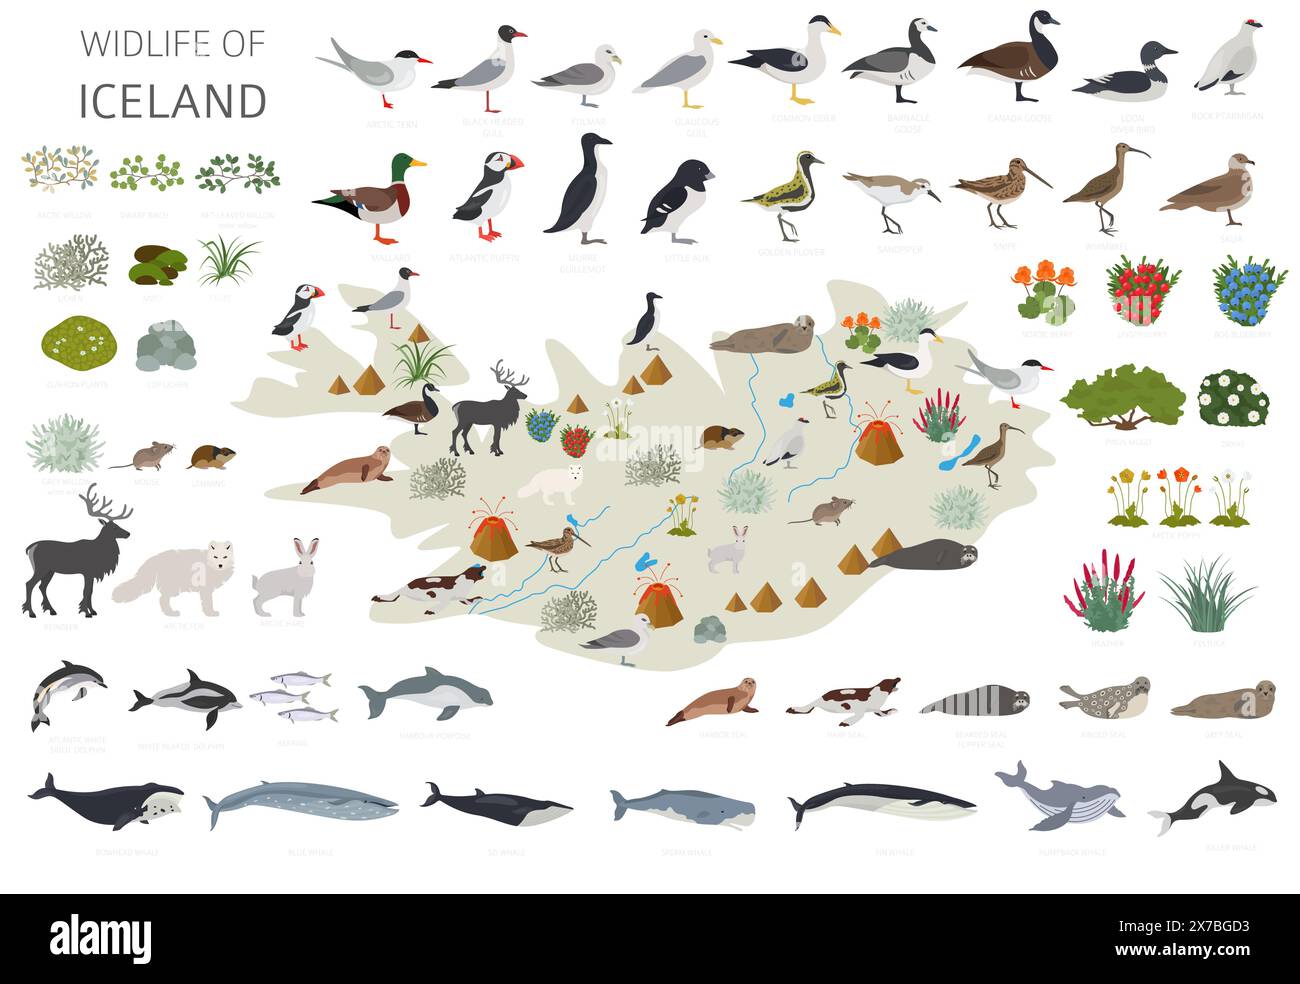 Flat design of Iceland wildlife. Animals, birds and plants constructor elements isolated on white set. North Atlantic nature. Vector illustration Stock Vector